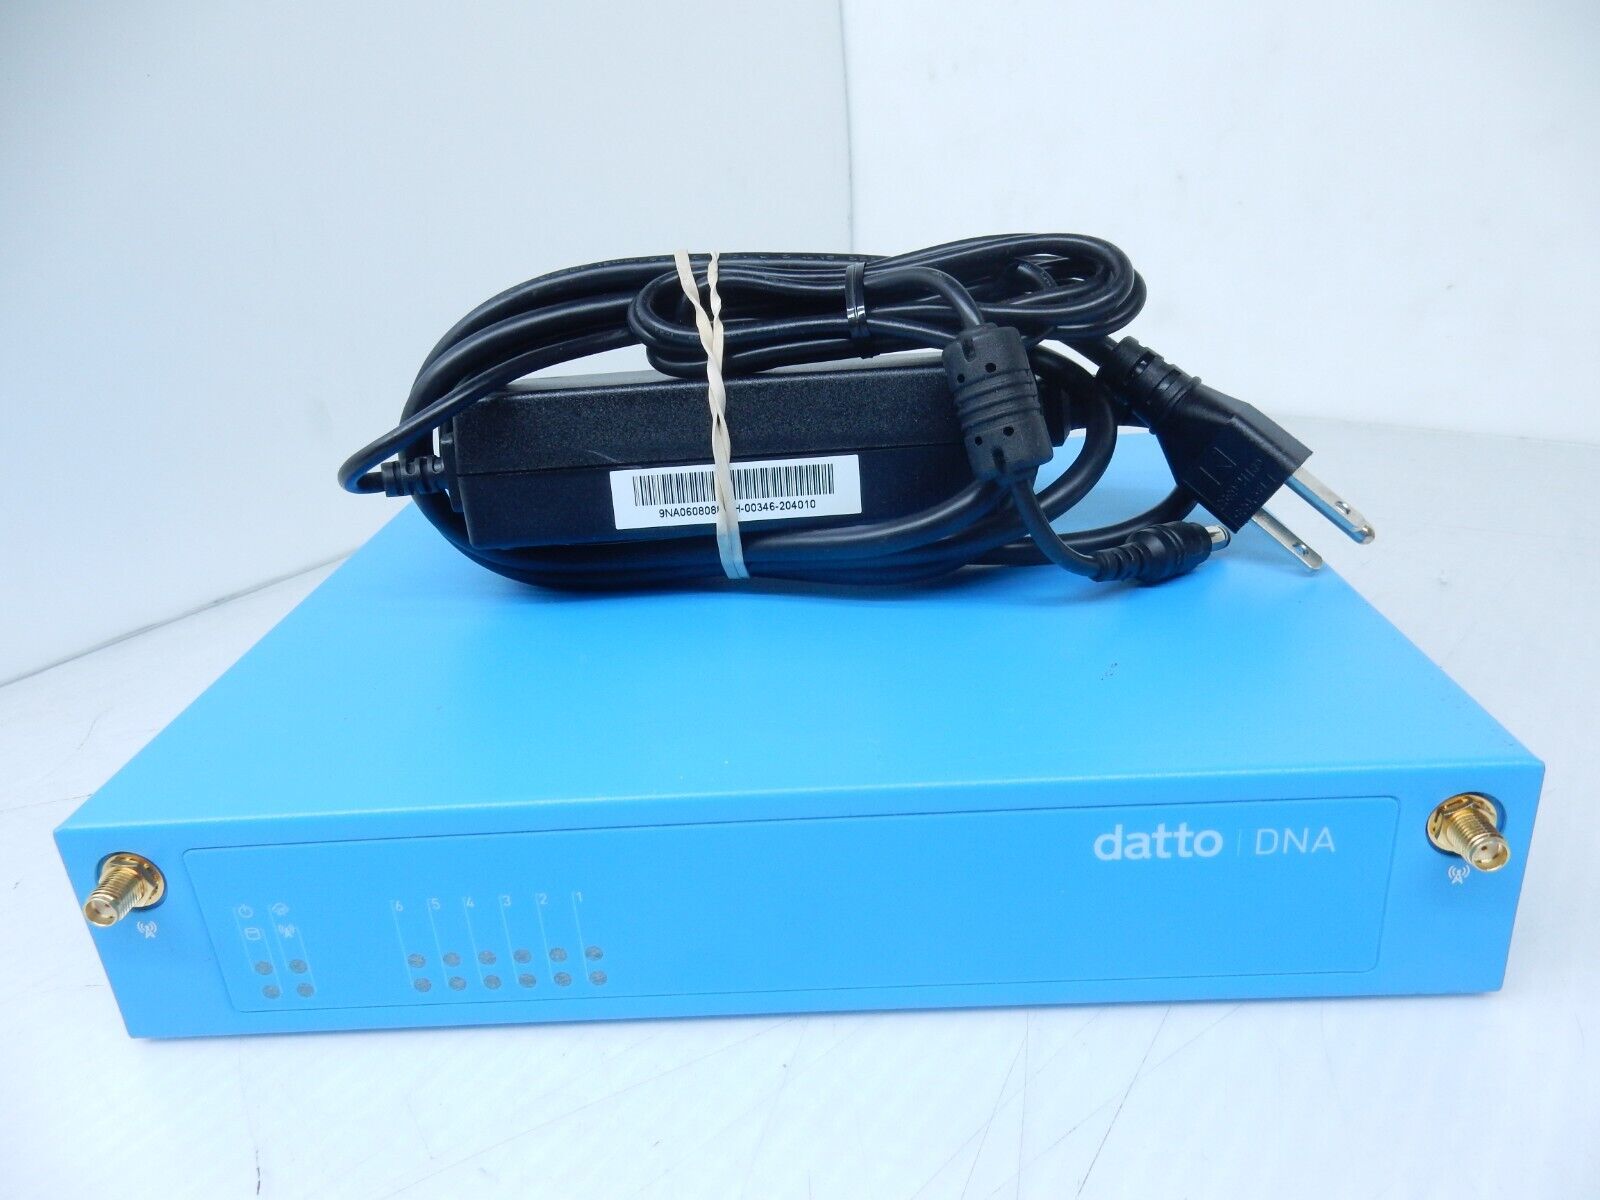 DATTO CLOUD ROUTER VPN FIREWALL APPLIANCE WITH WIFI ACCESS POINT DNA-VZ5  T7-C15